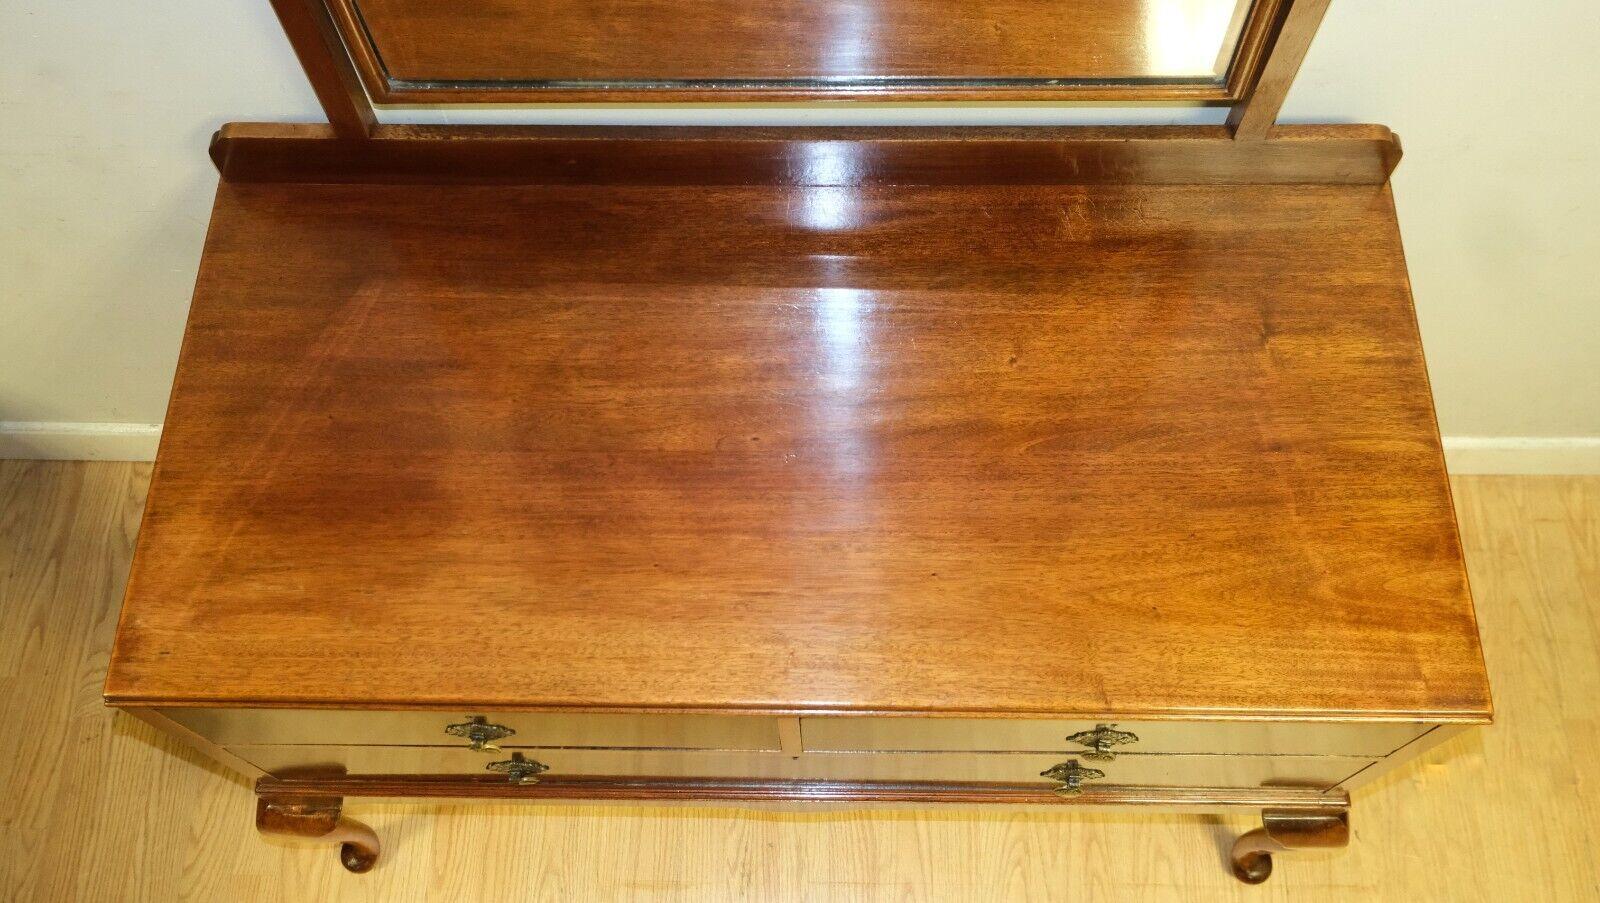 LOVELY EARLY 20TH CENTURY HARDWOOD DRESSiNG TABLE RAISED ON CABRIOLE LEGS (Englisch) im Angebot